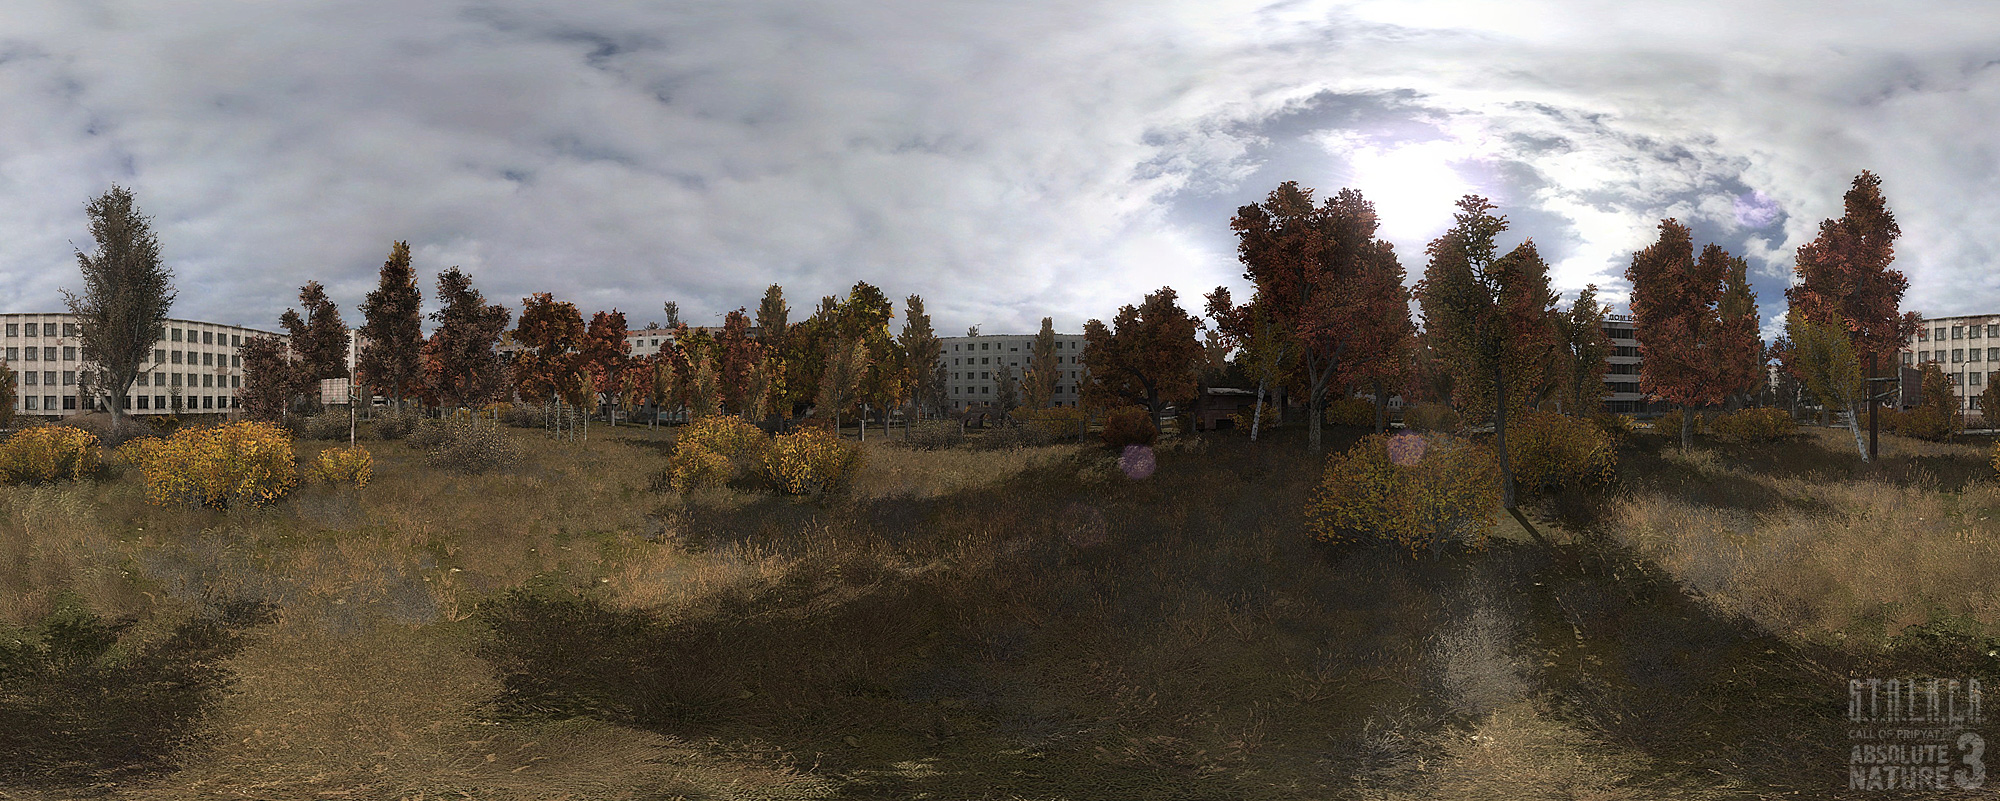 . vedtage slogan Absolute Nature 3 image - AtmosFear for Call of Pripyat mod for  S.T.A.L.K.E.R.: Call of Pripyat - Mod DB